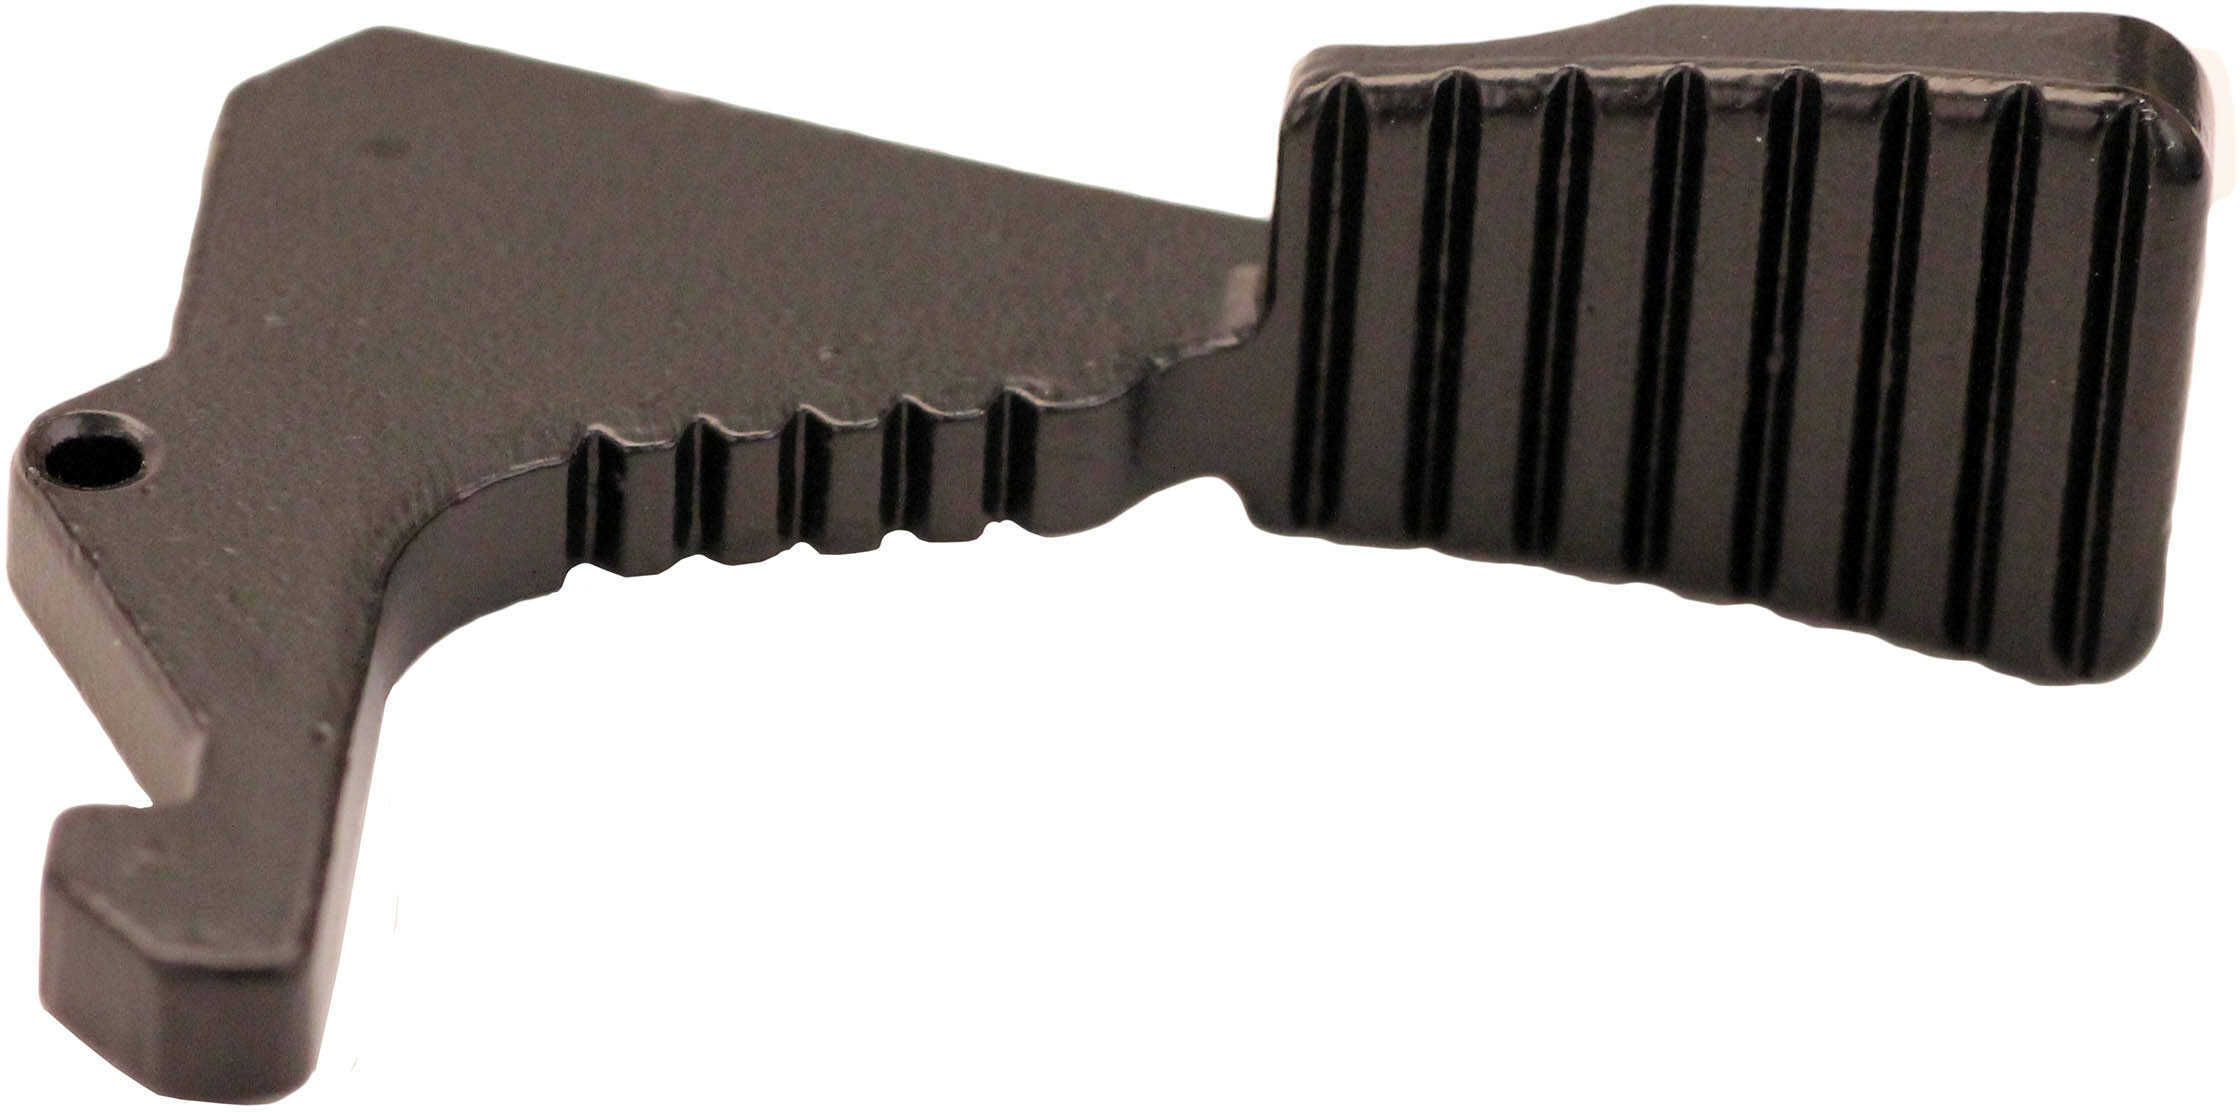 UTG AR-15/Model 4 Extended Tactical Charging Handle Latch